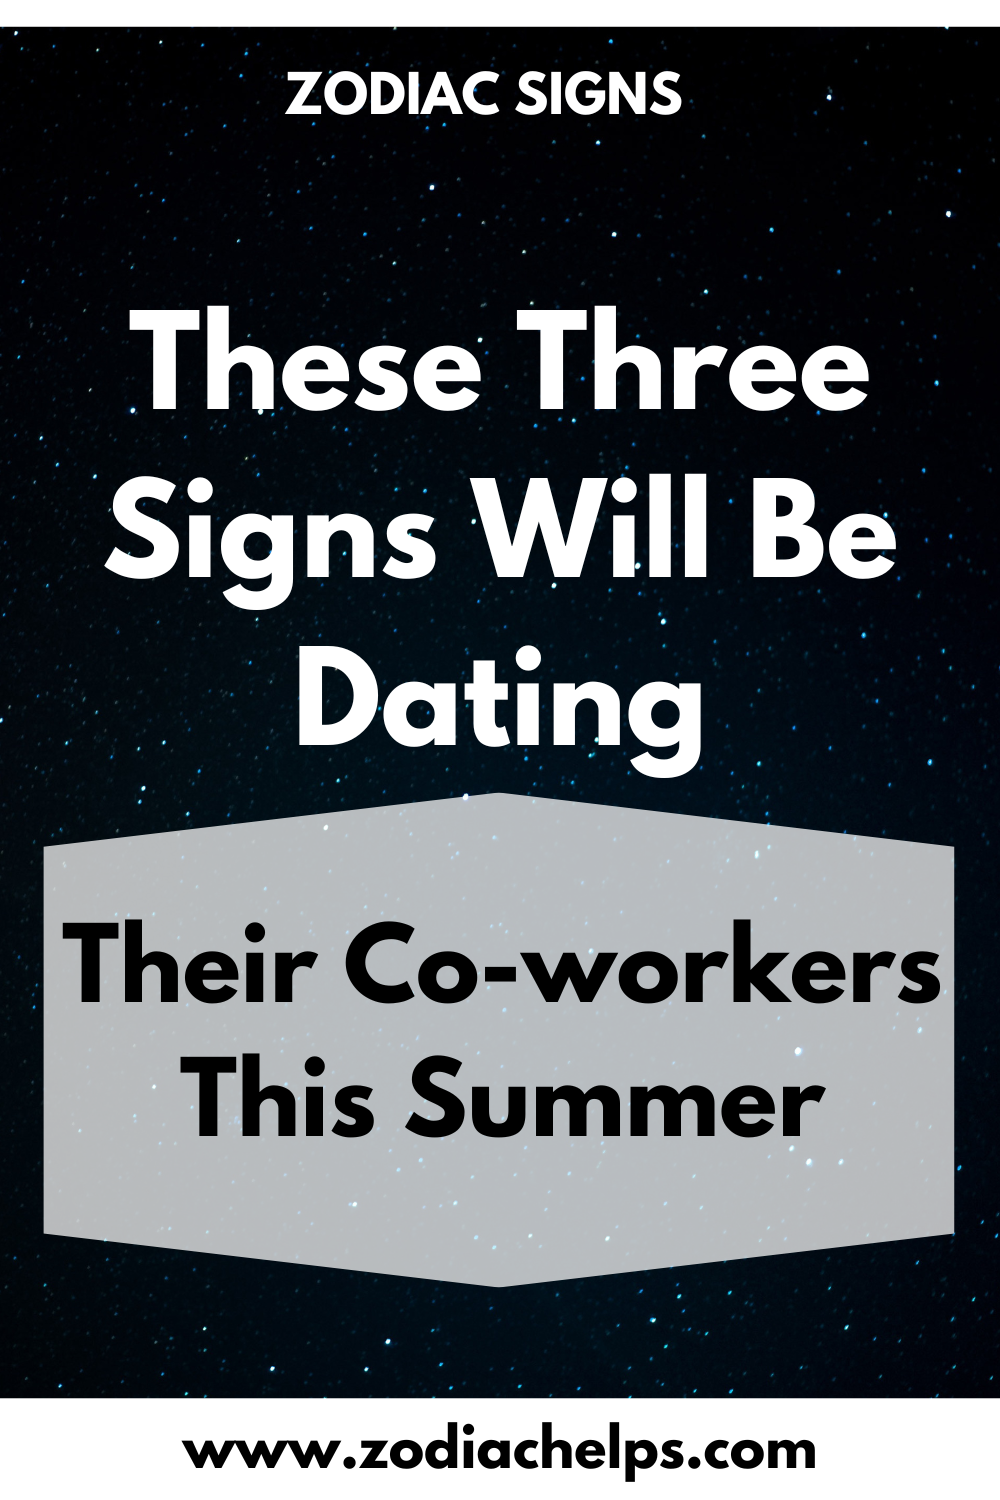 These Three Signs Will Be Dating Their Co-workers This Summer